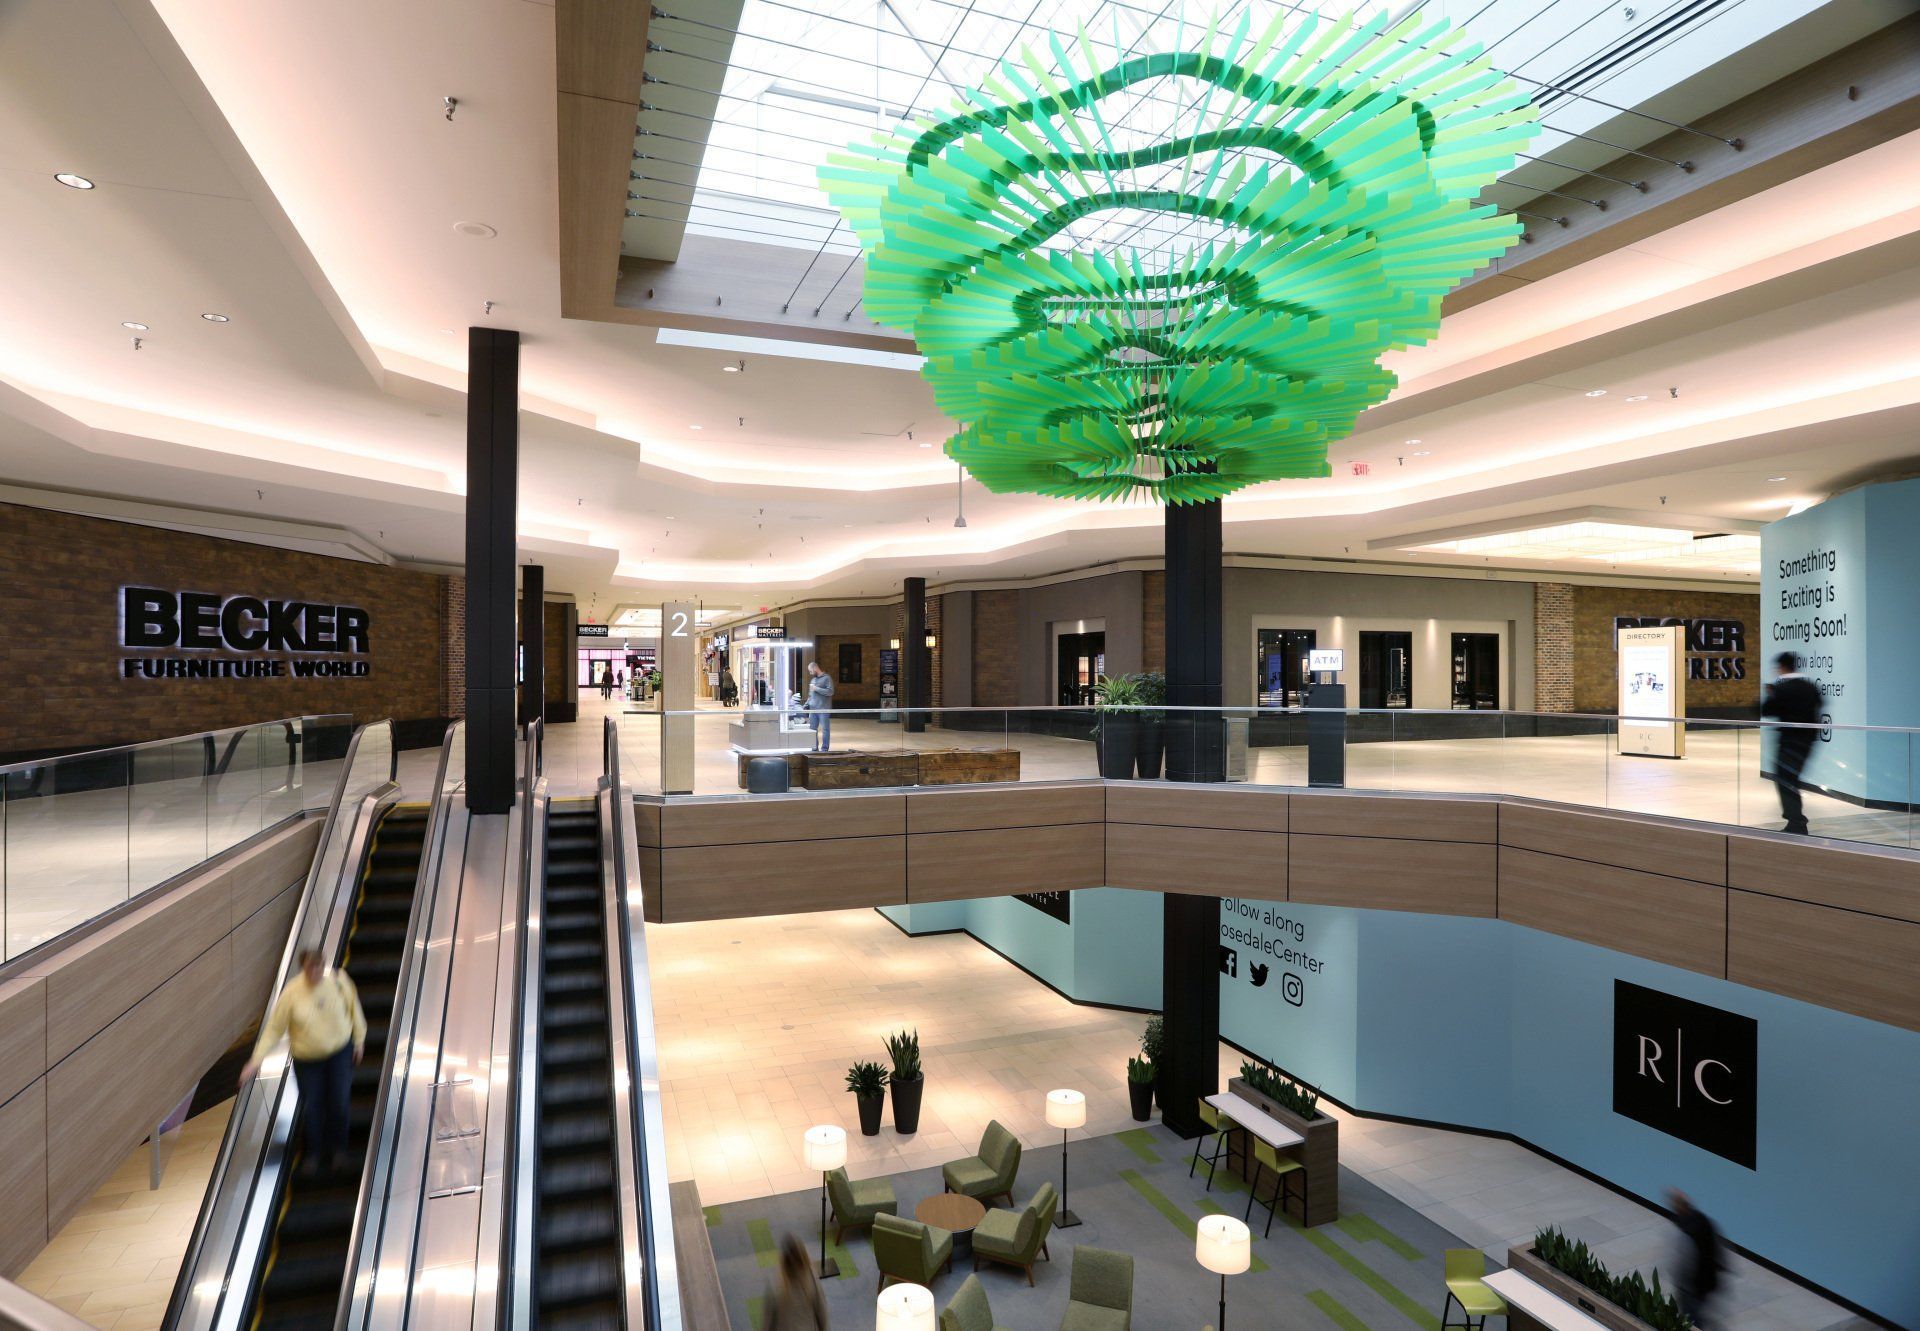 An artist 's impression of the inside of a shopping mall